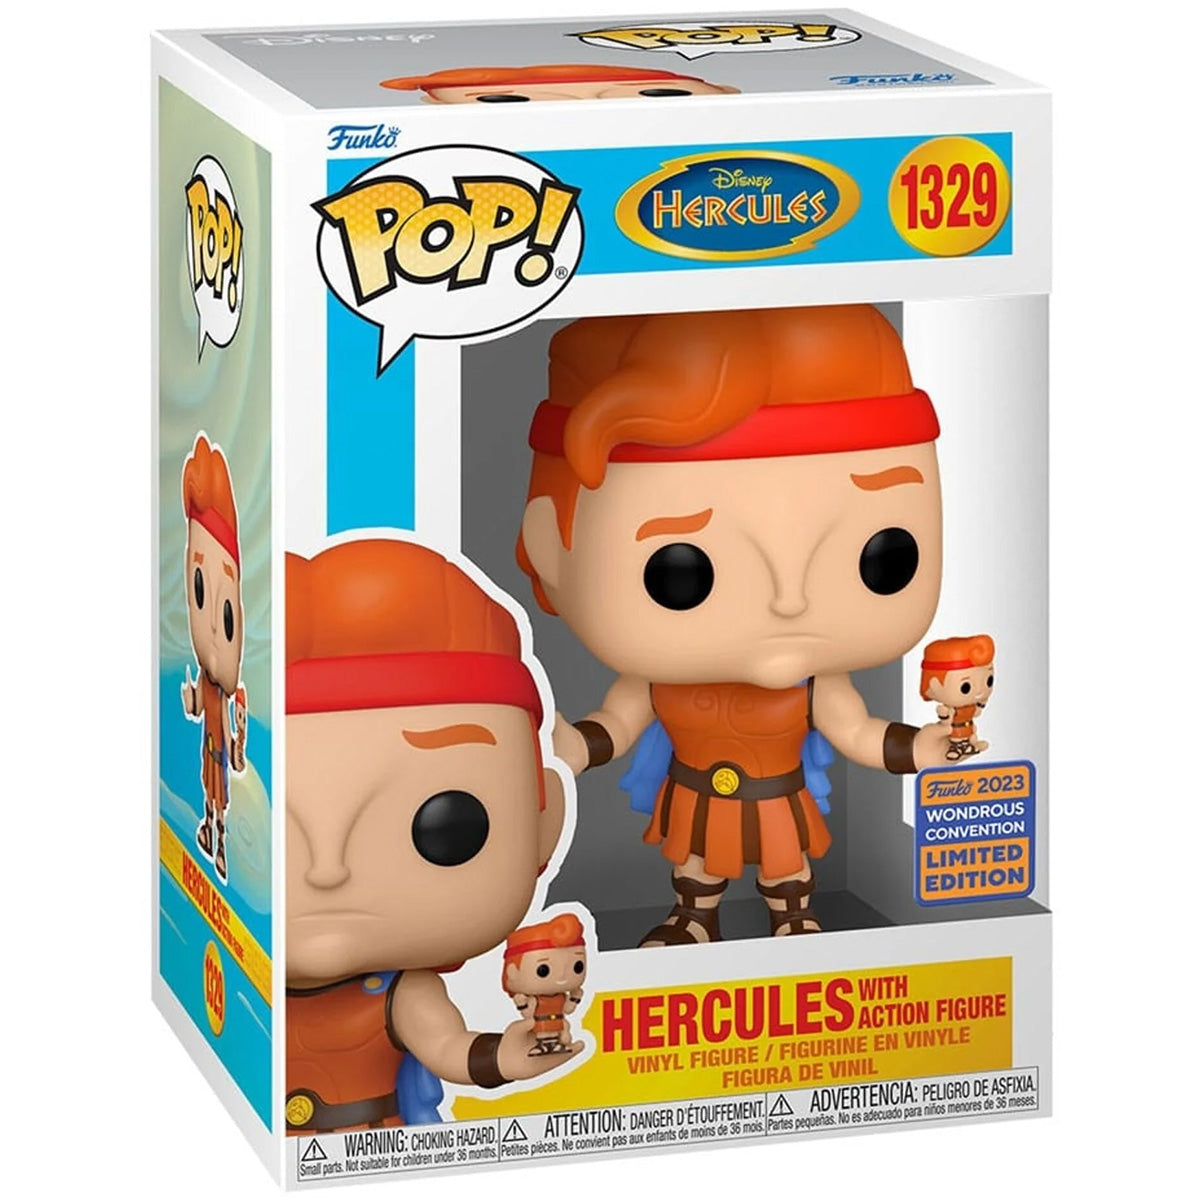 Funko POP! - Disney: Hercules with Action Figure #1329 (Wondrous Convention, Limited Edition)